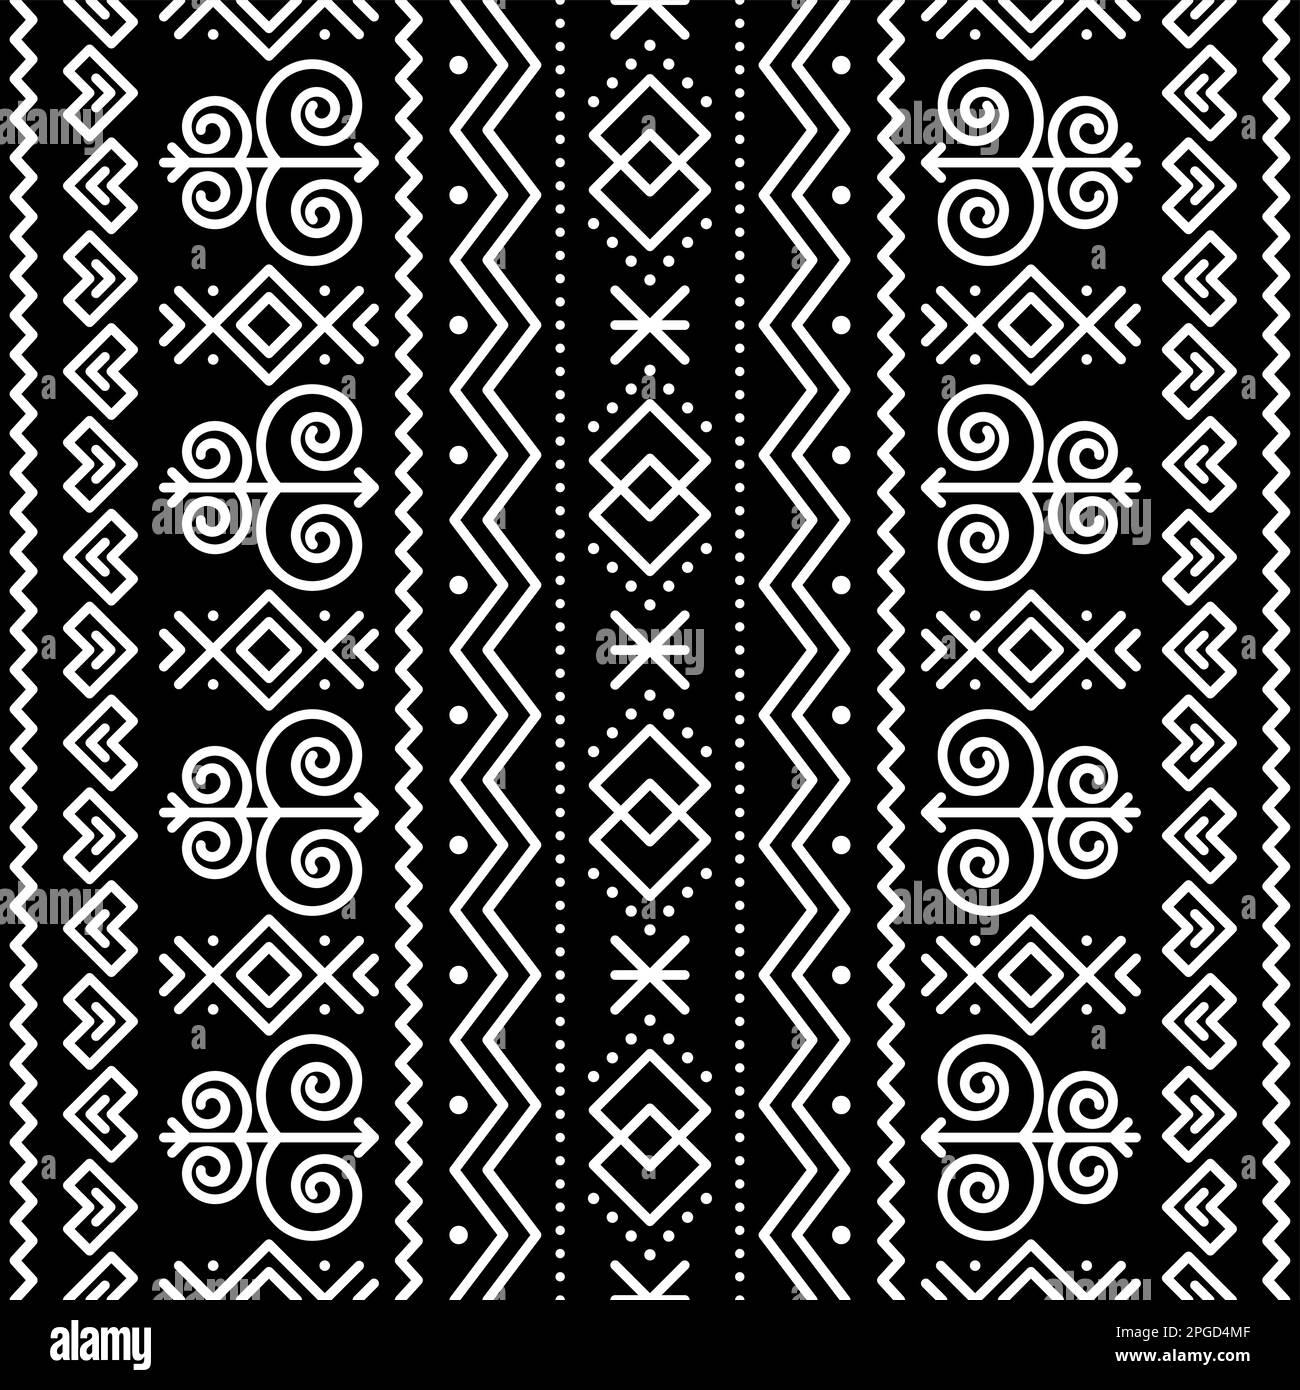 Slovak tribal folk art vector seamless geometric pattern with geometric motif- vertical deisgn inspired by traditional painted art from village Cicman Stock Vector